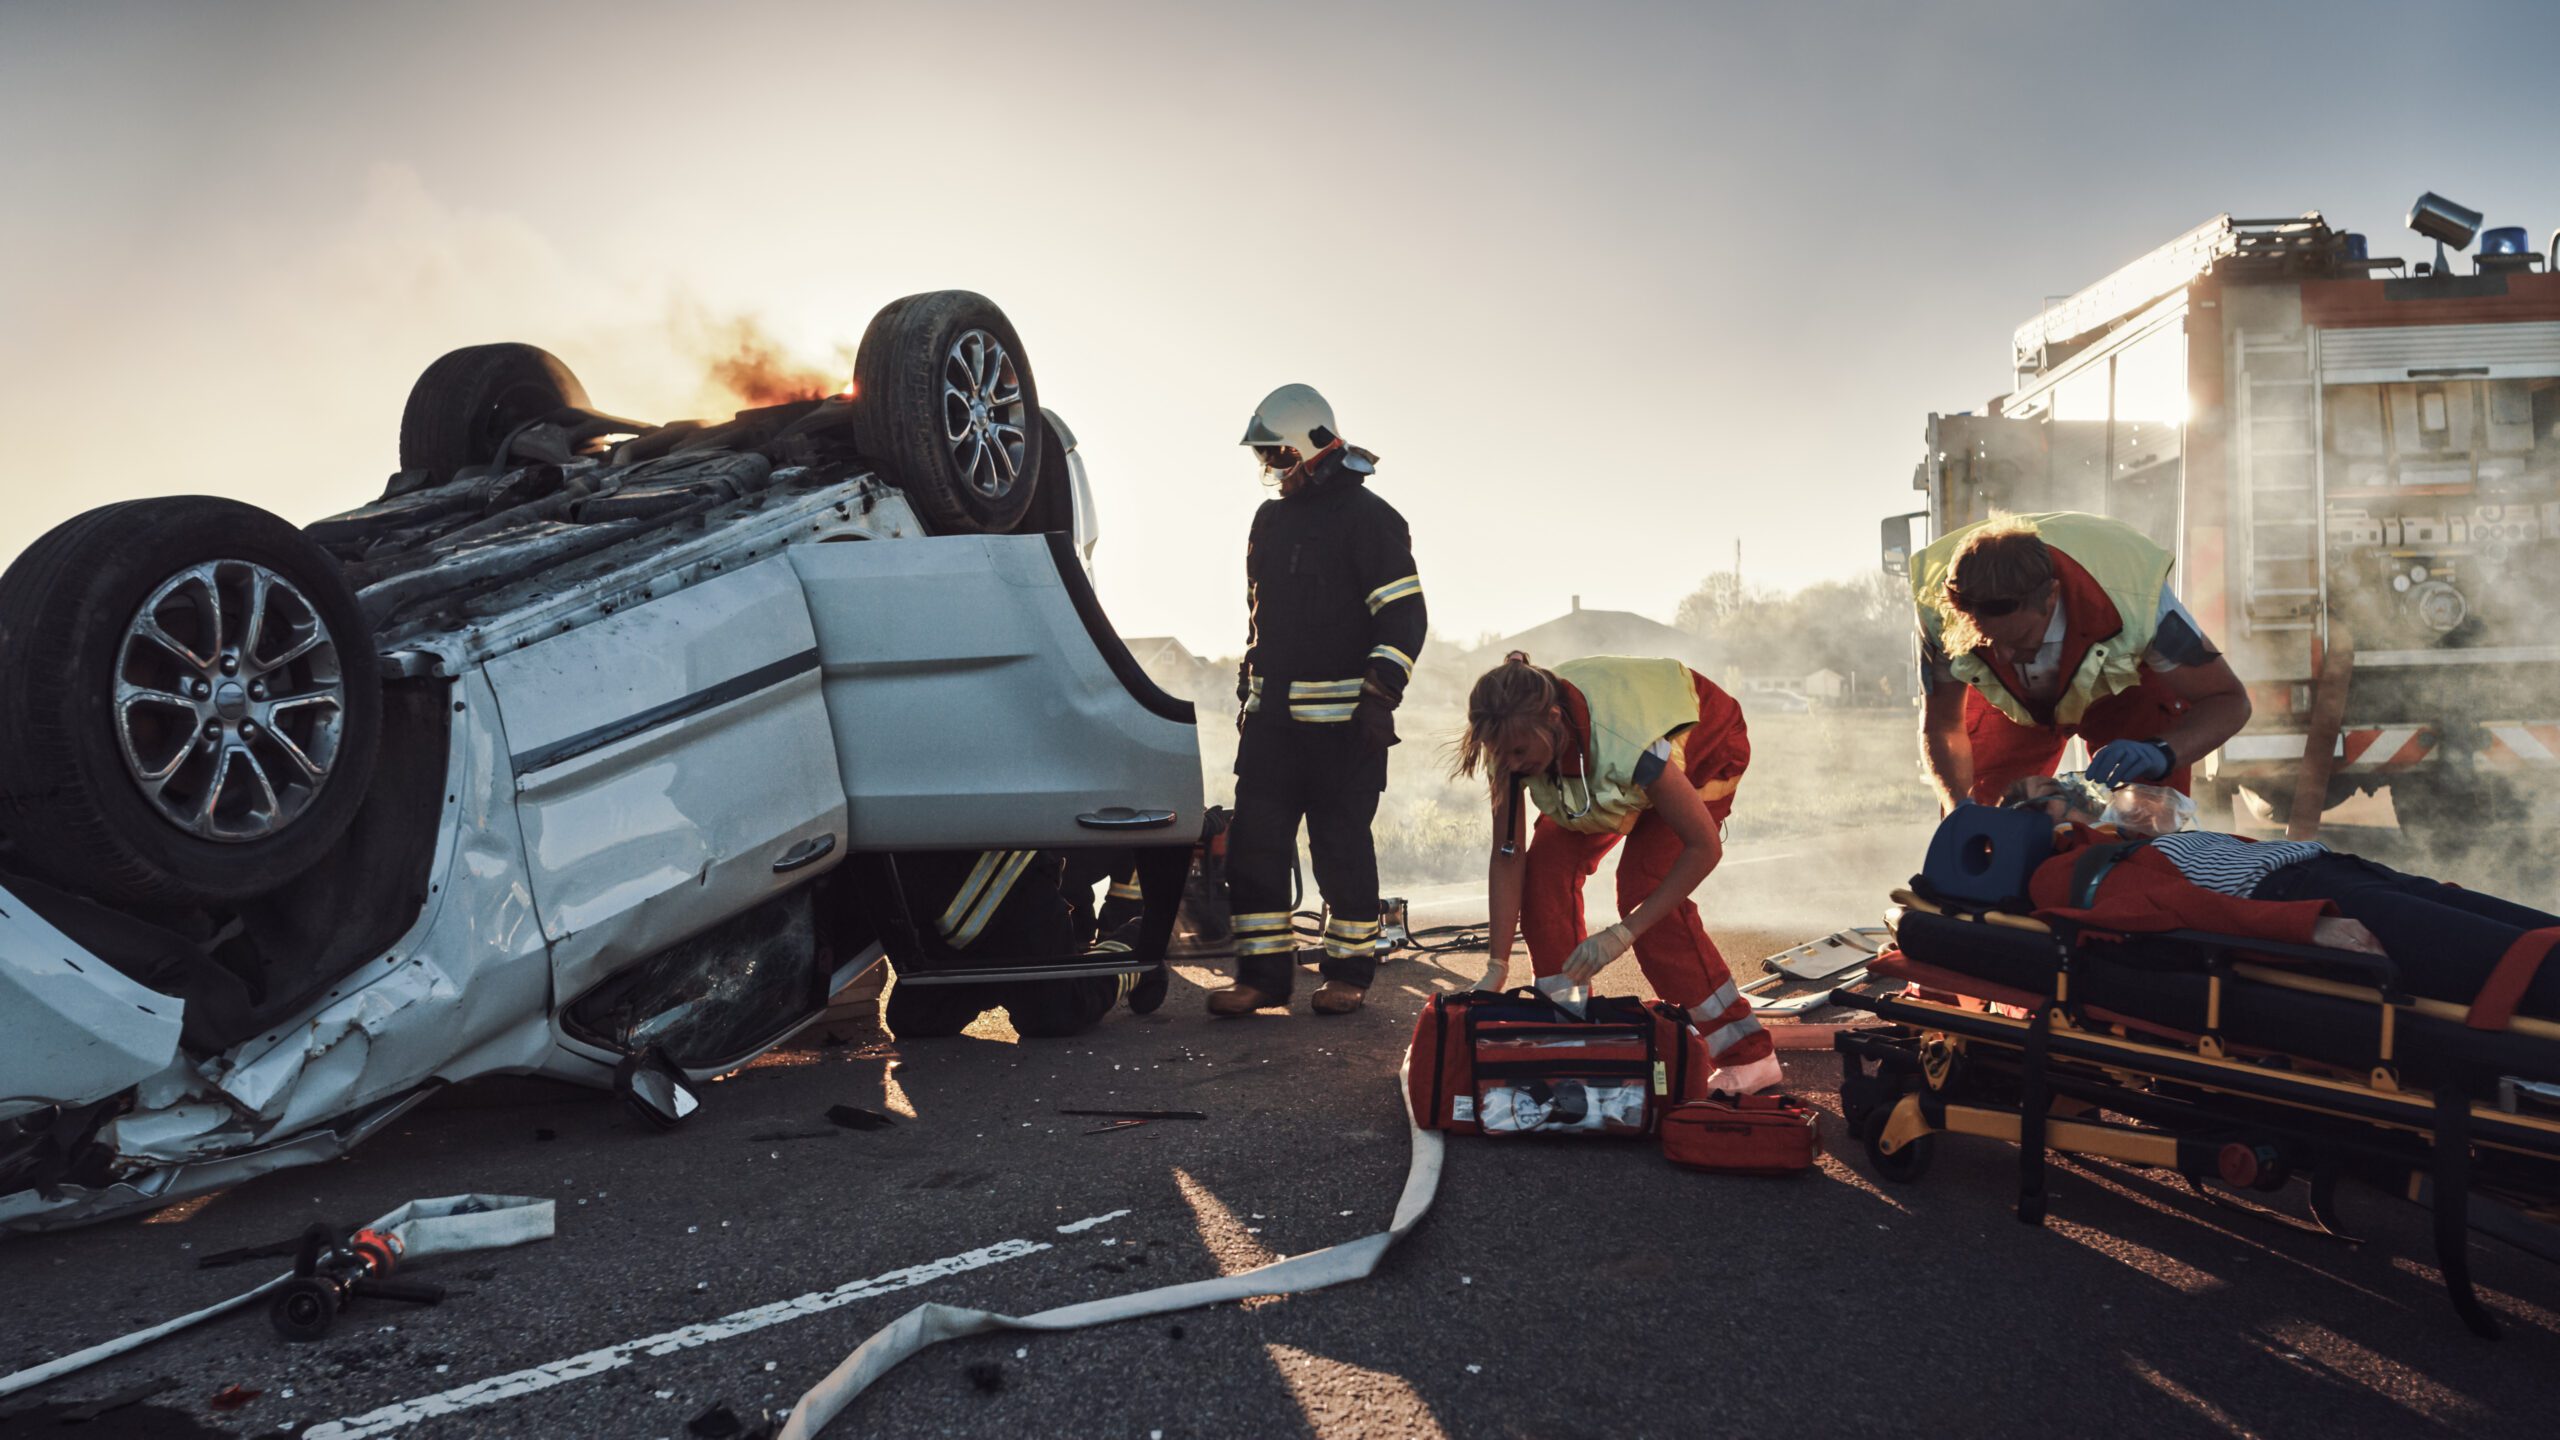 Why Truck Accidents Are More Complicated Than Other Traffic Collisions